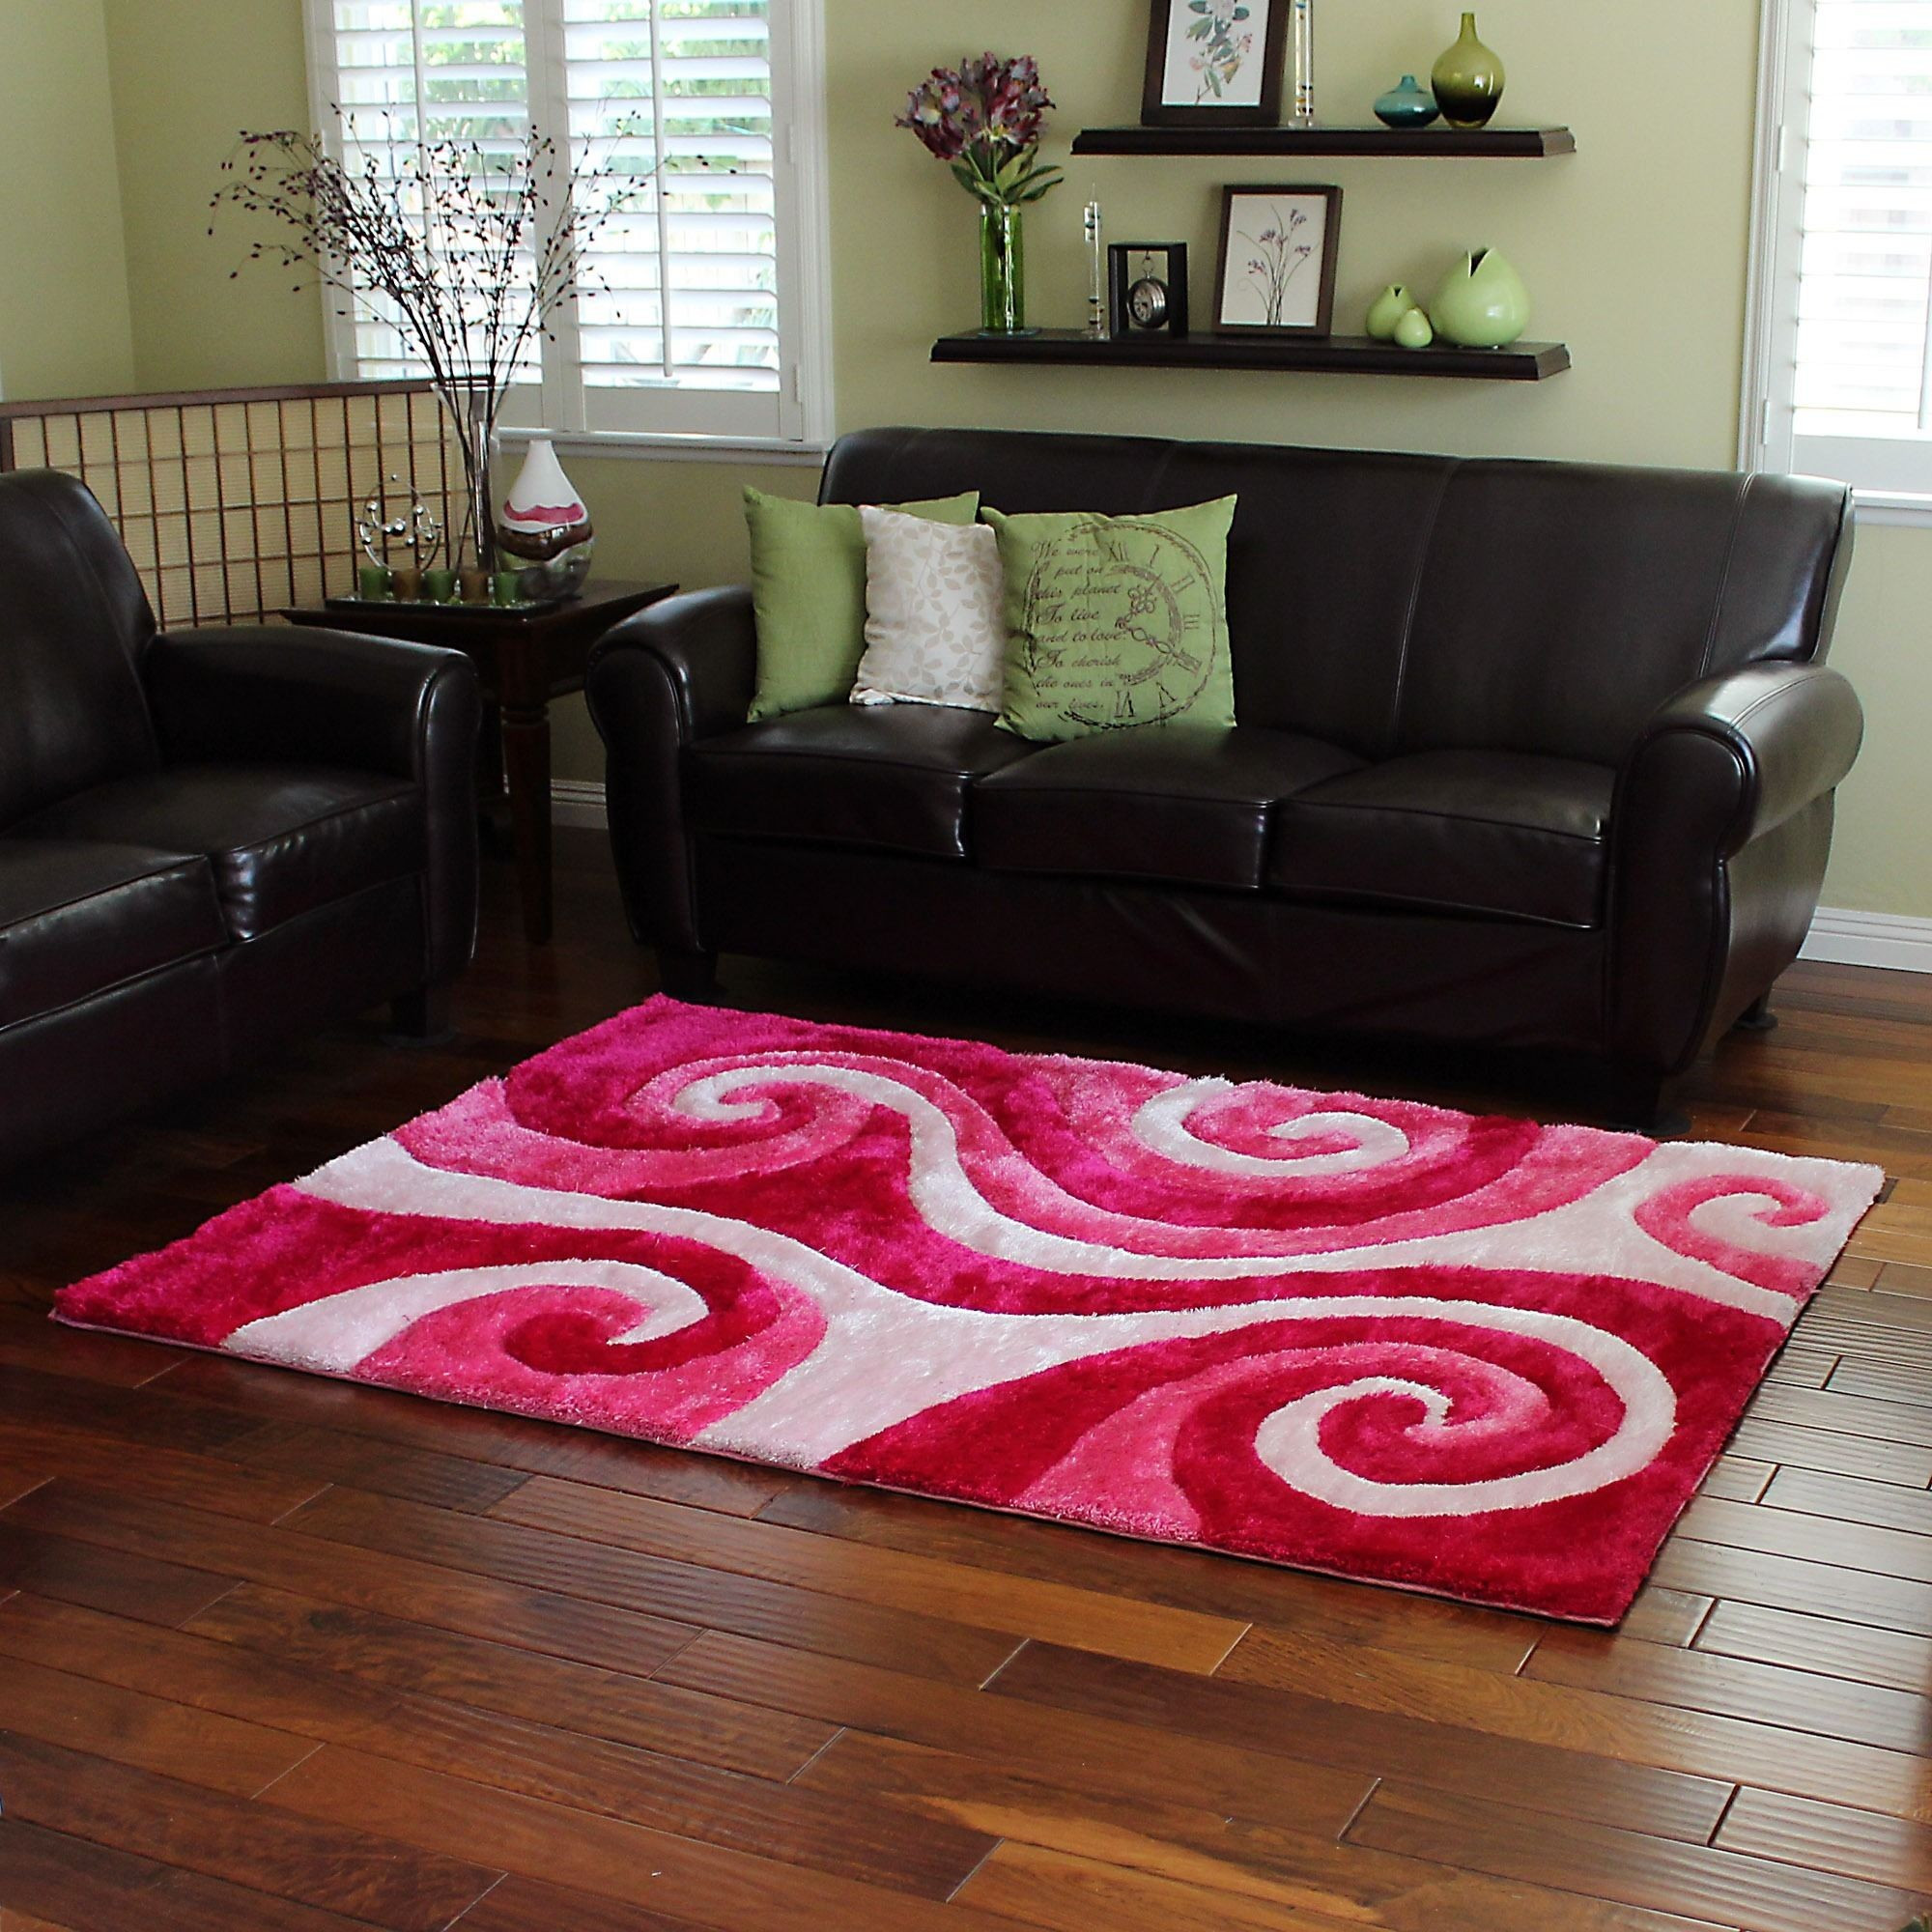 hardwood flooring reviews of cheapest place to buy area rugs awesome area rugs for hardwood intended for hardwood floors best jute rugs 0d cheapest place to buy area rugs lovely abstract swirl pink shag area rug 5 x 7